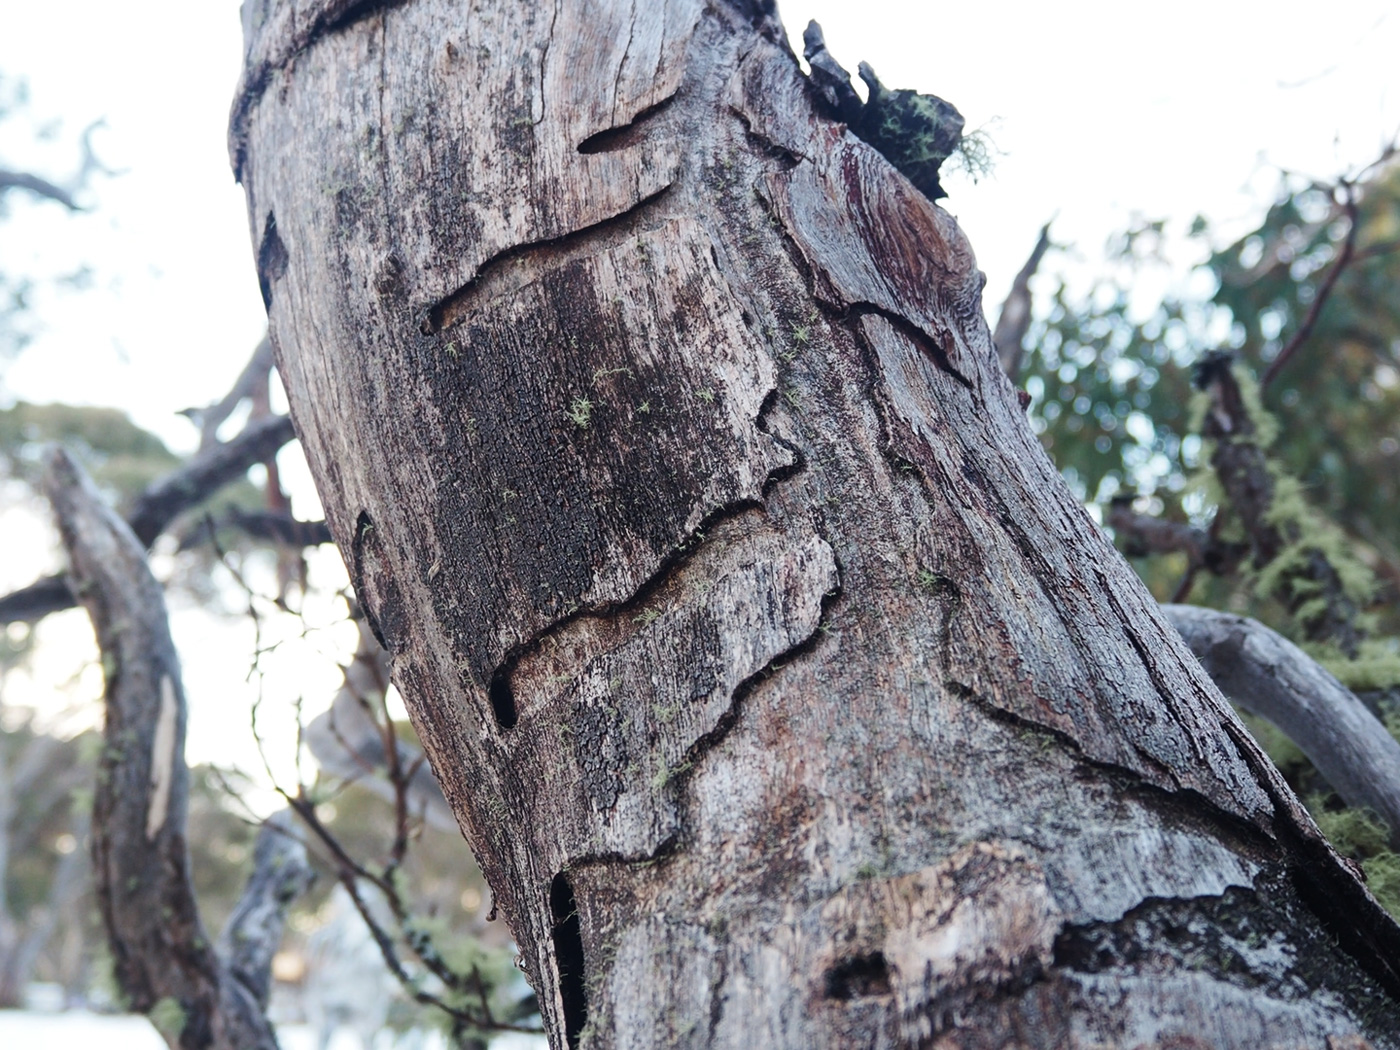 snow gums affected by beetle damage vs a healthy tree